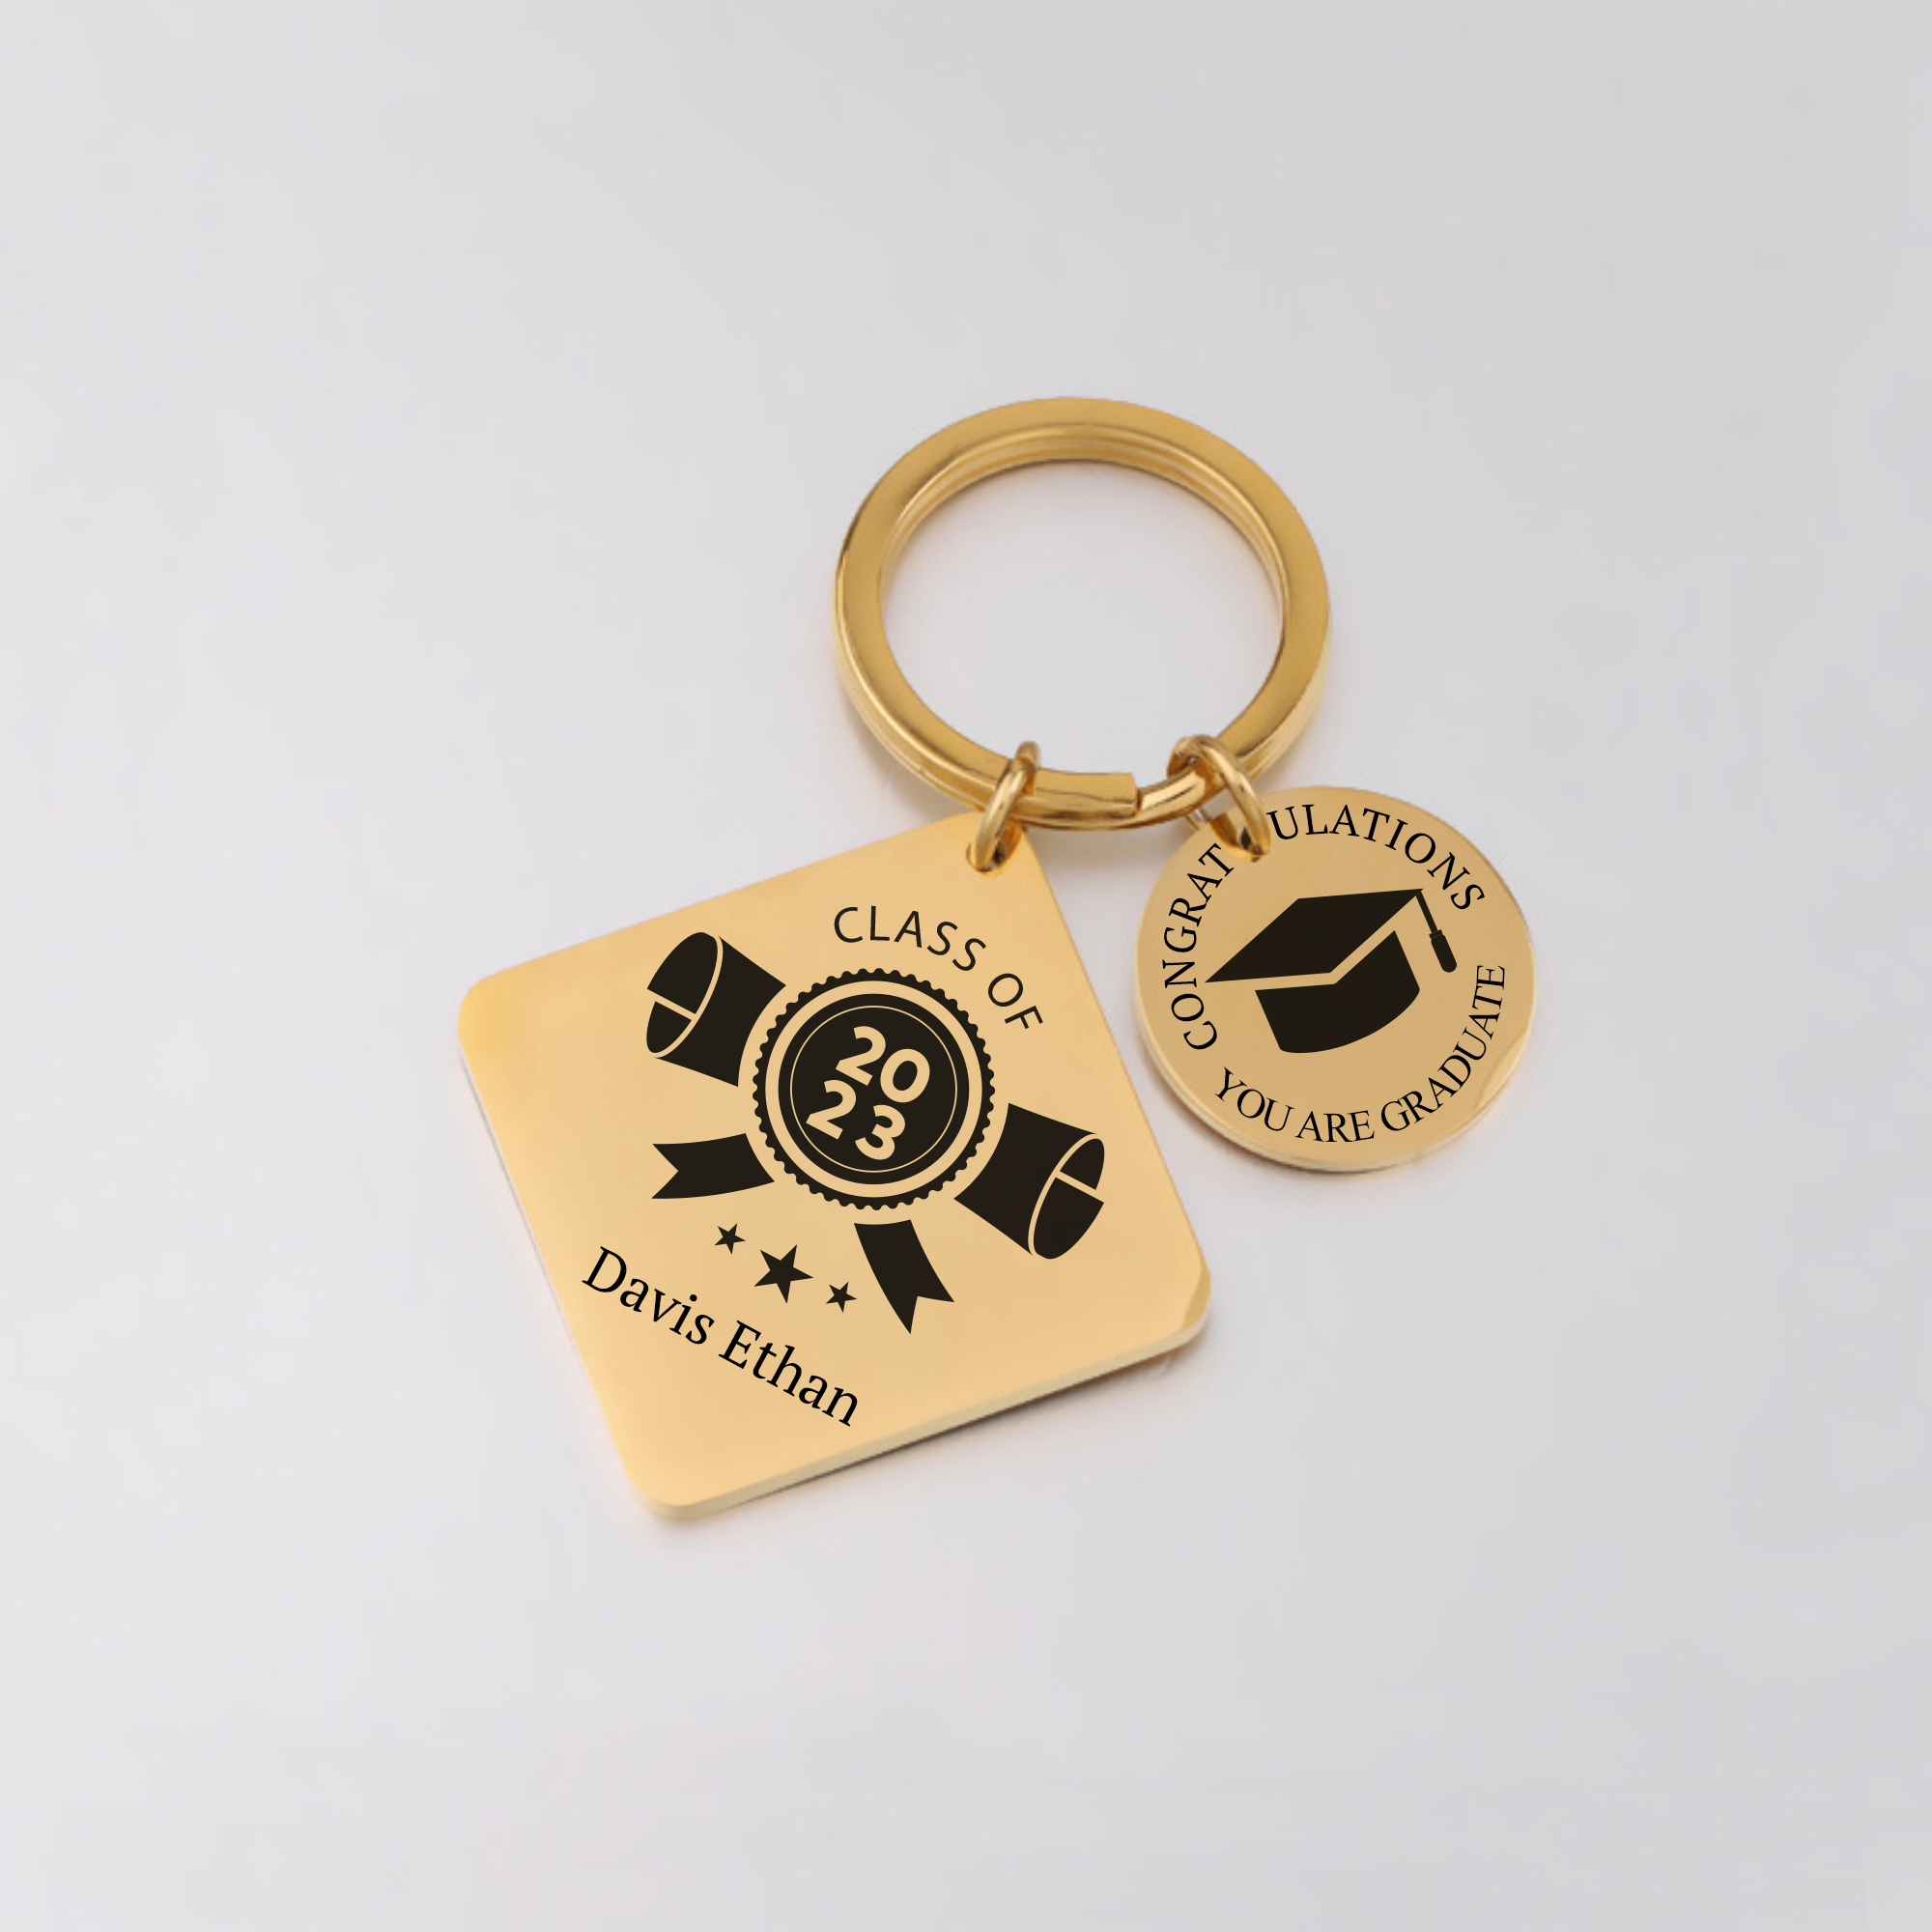 Graduction Class of the Year Keychain KCK 26 A